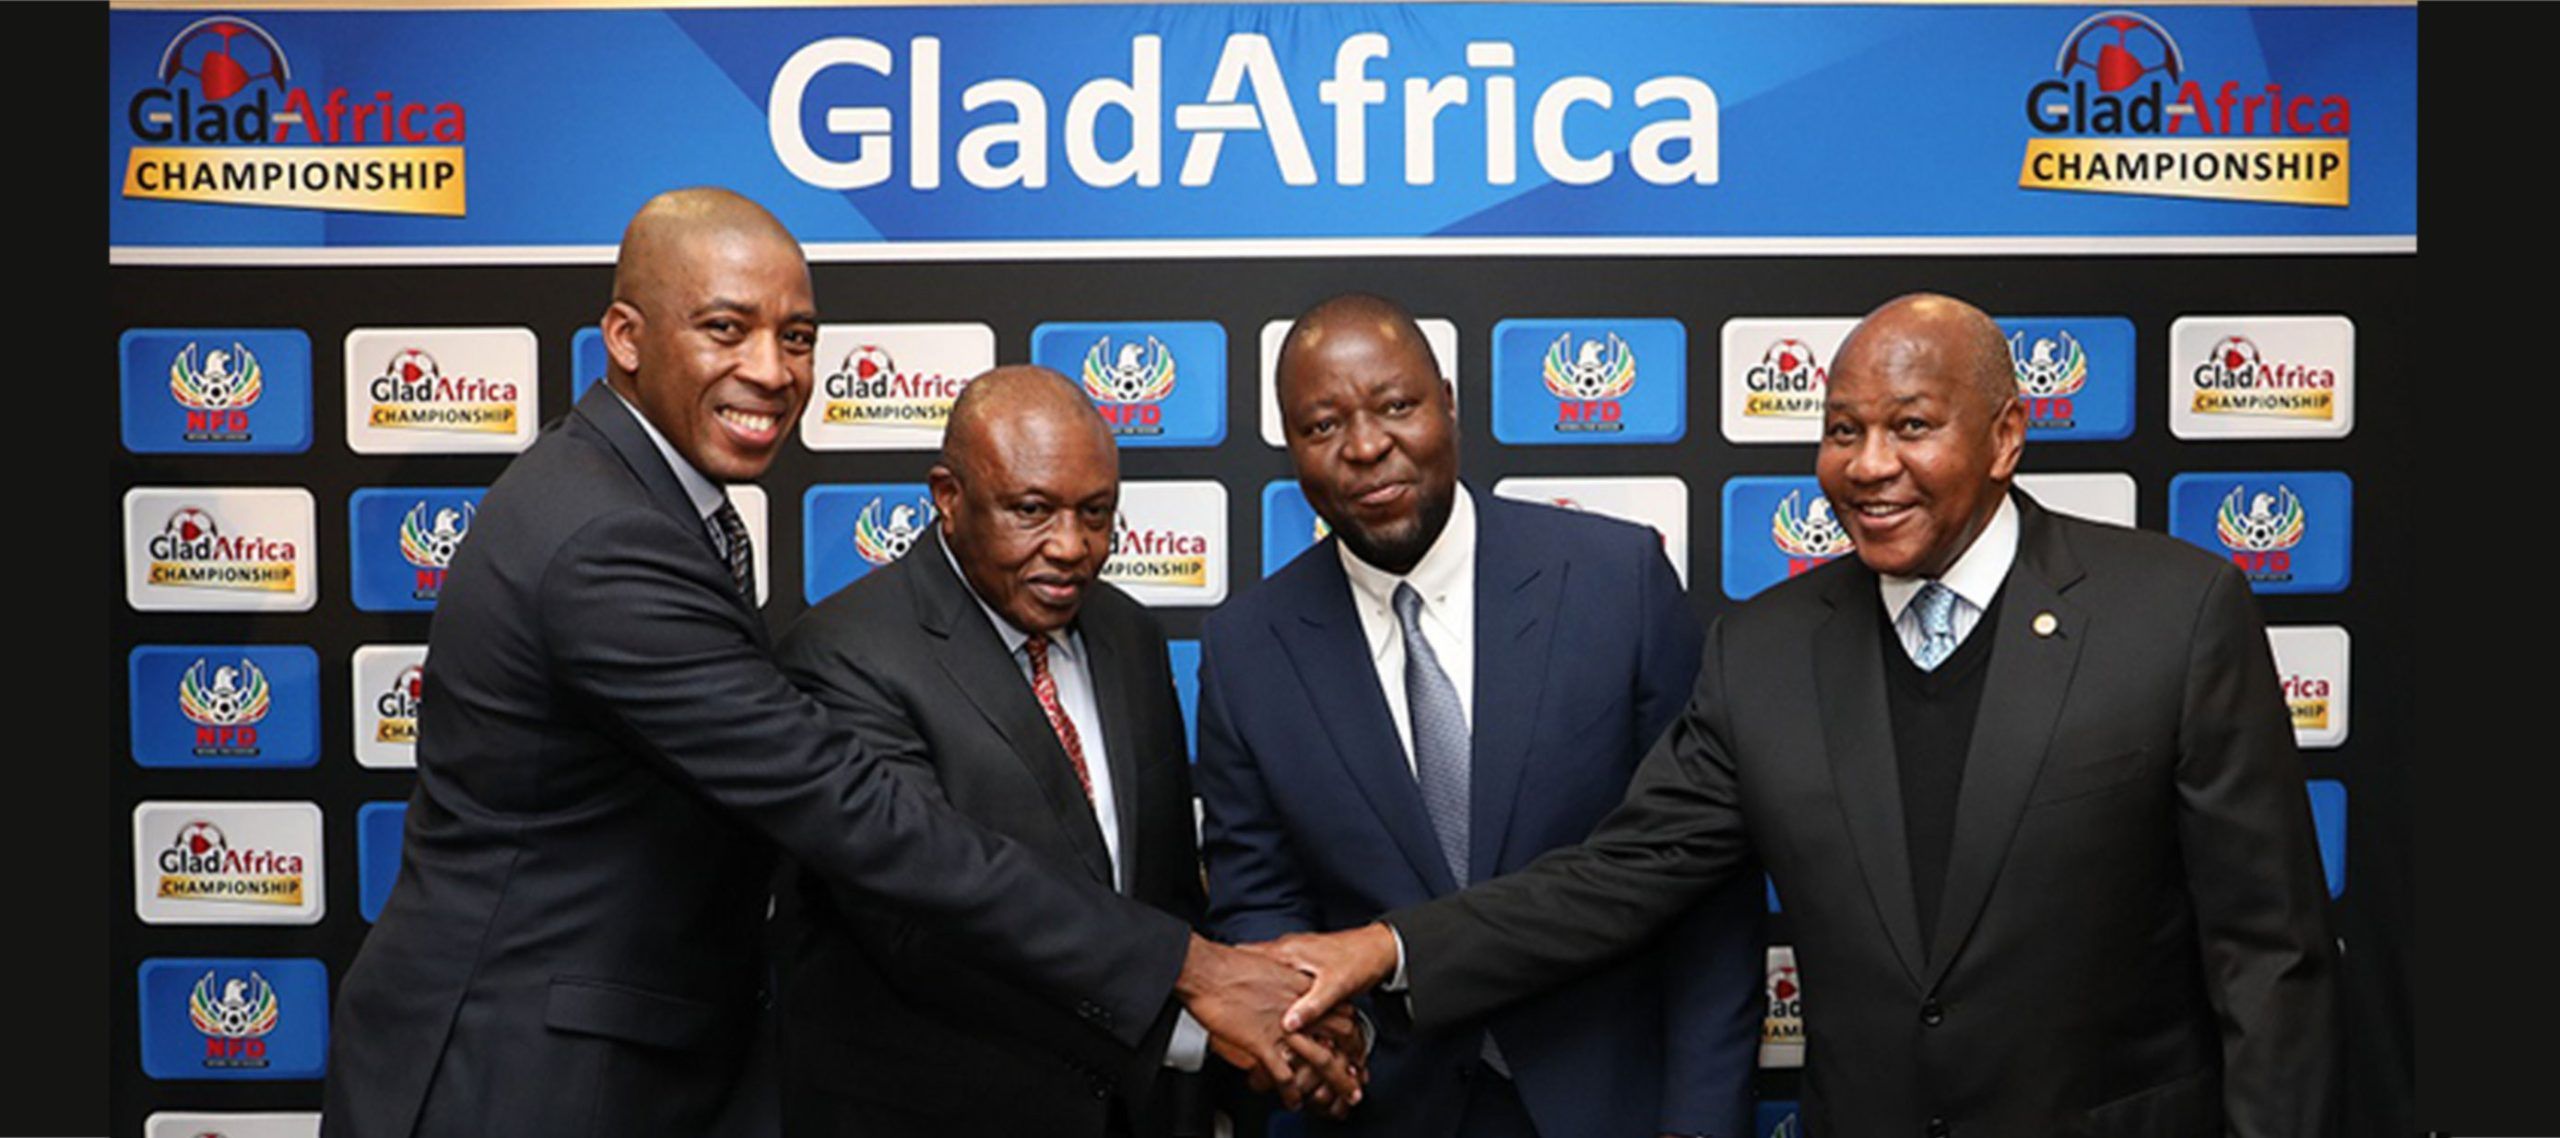 GladAfrica Group partners with the premier soccer league